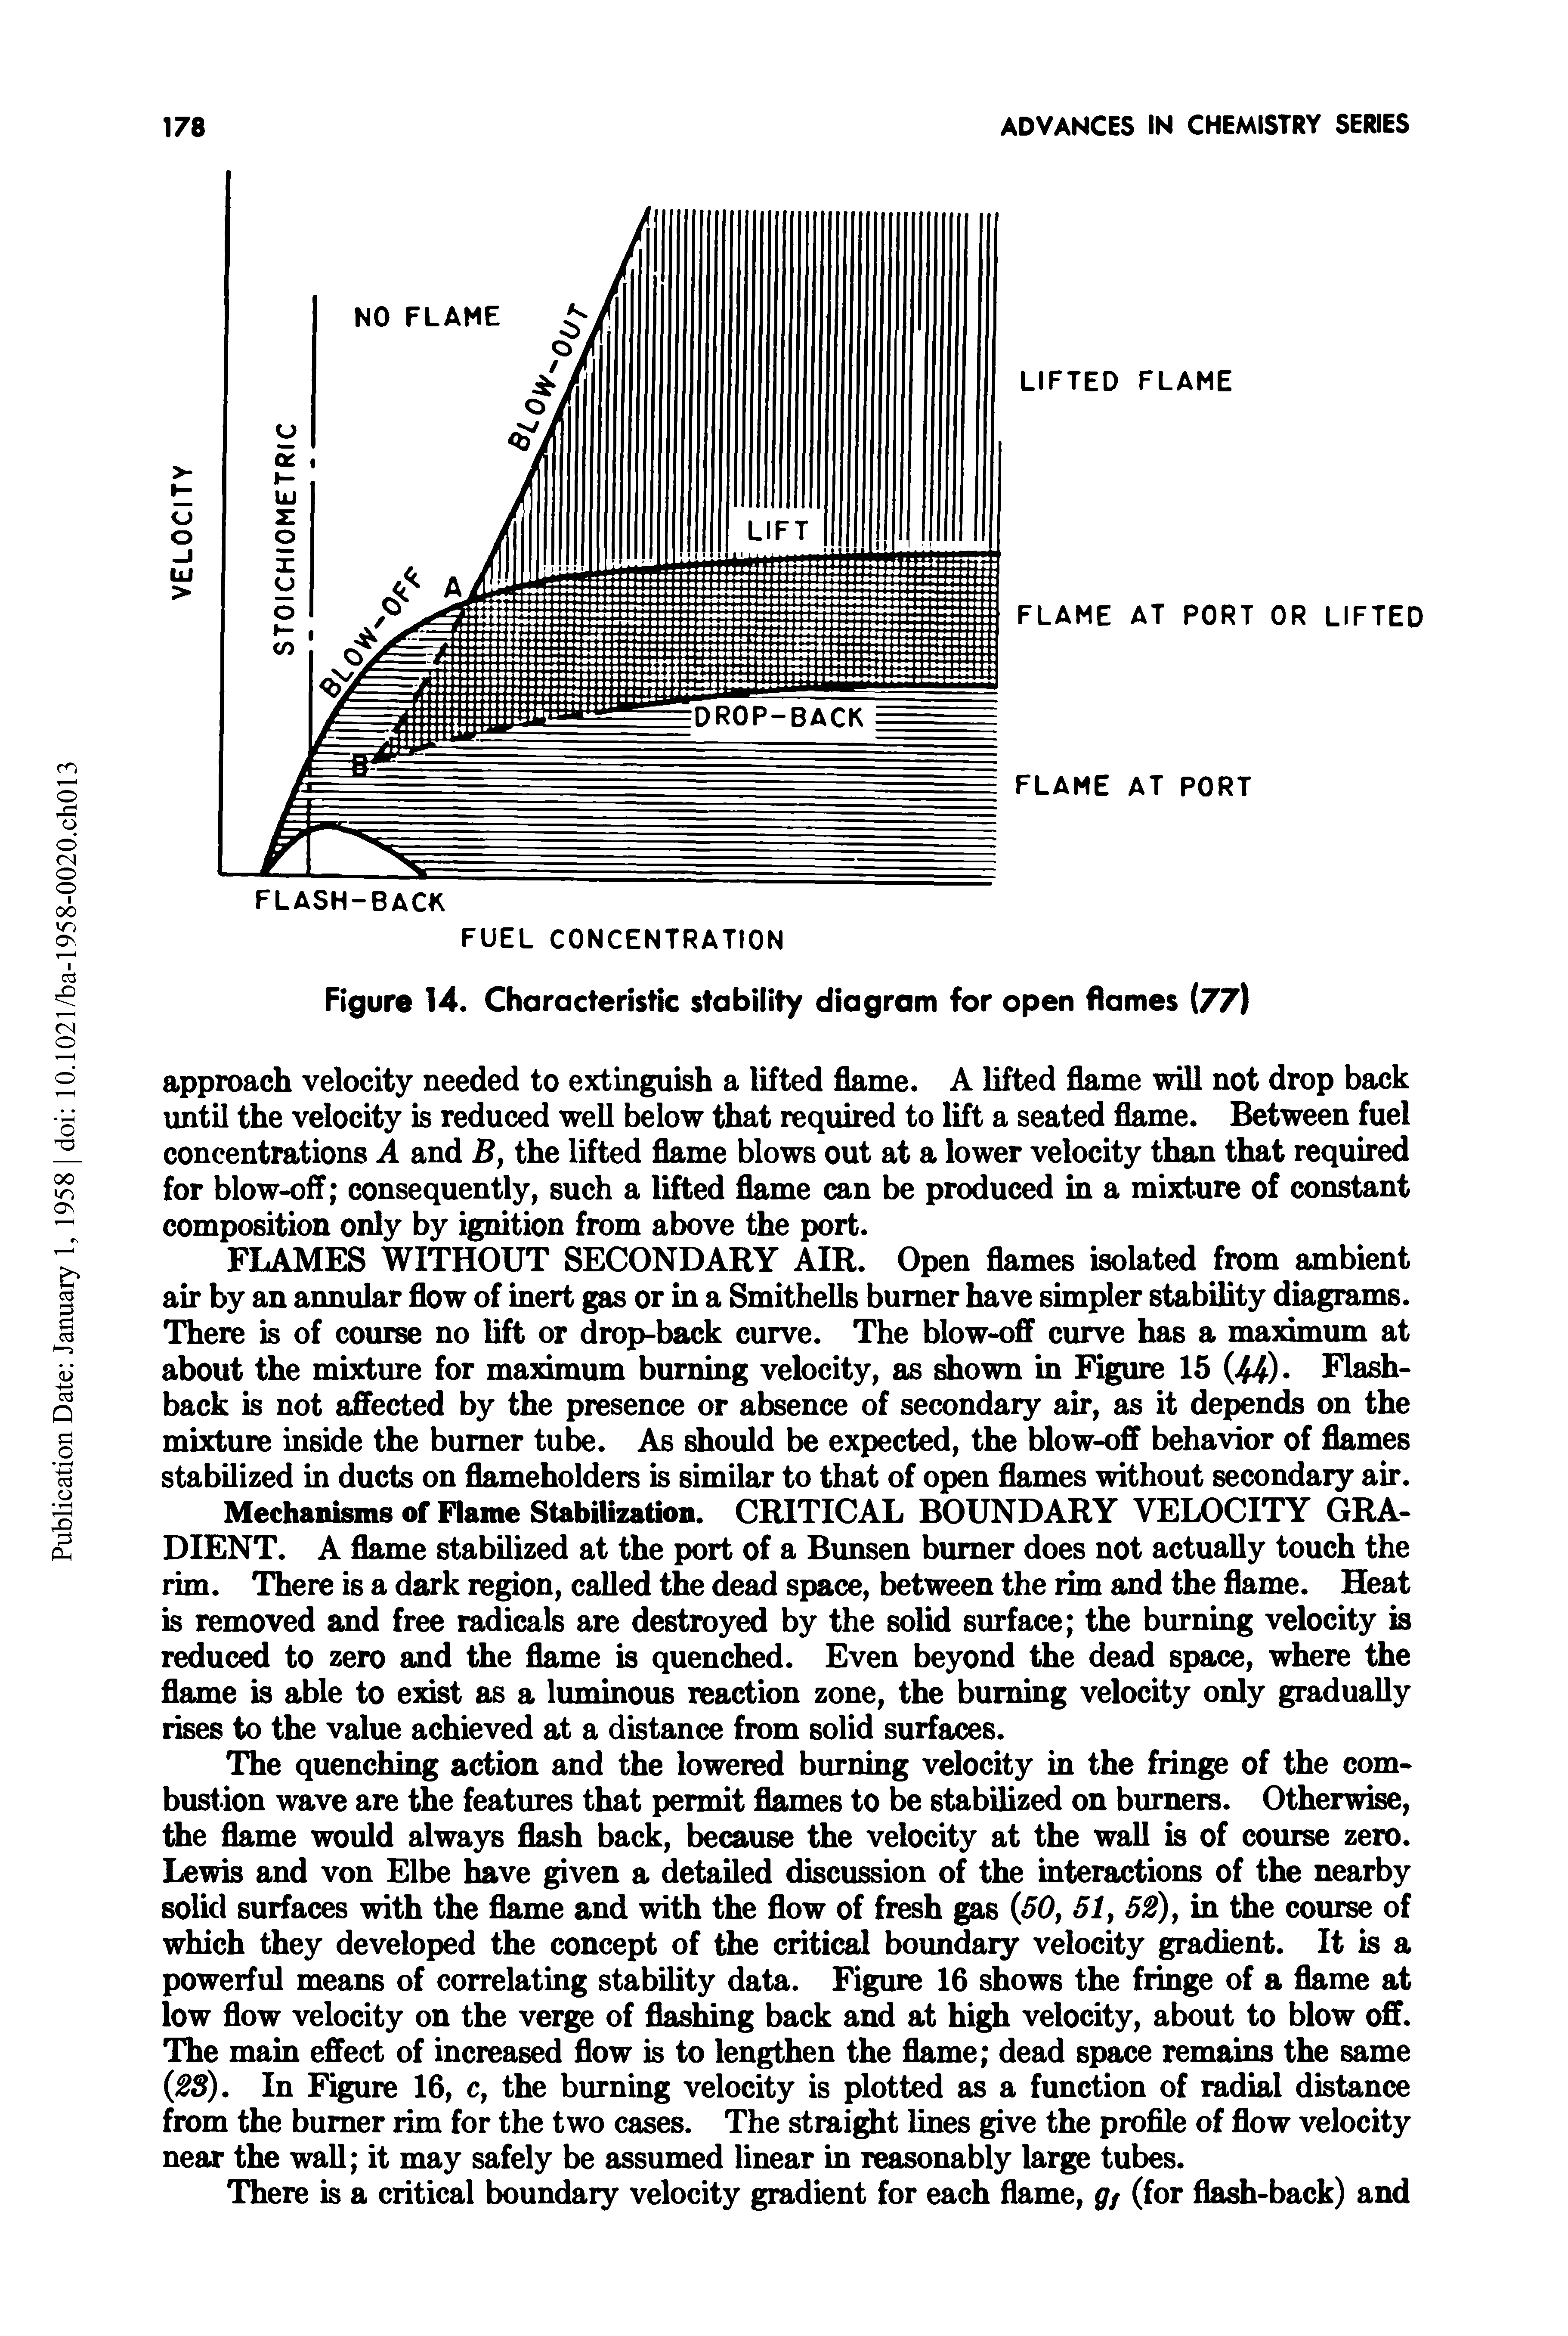 Figure 14. Characteristic stability diagram for open flames (77)...